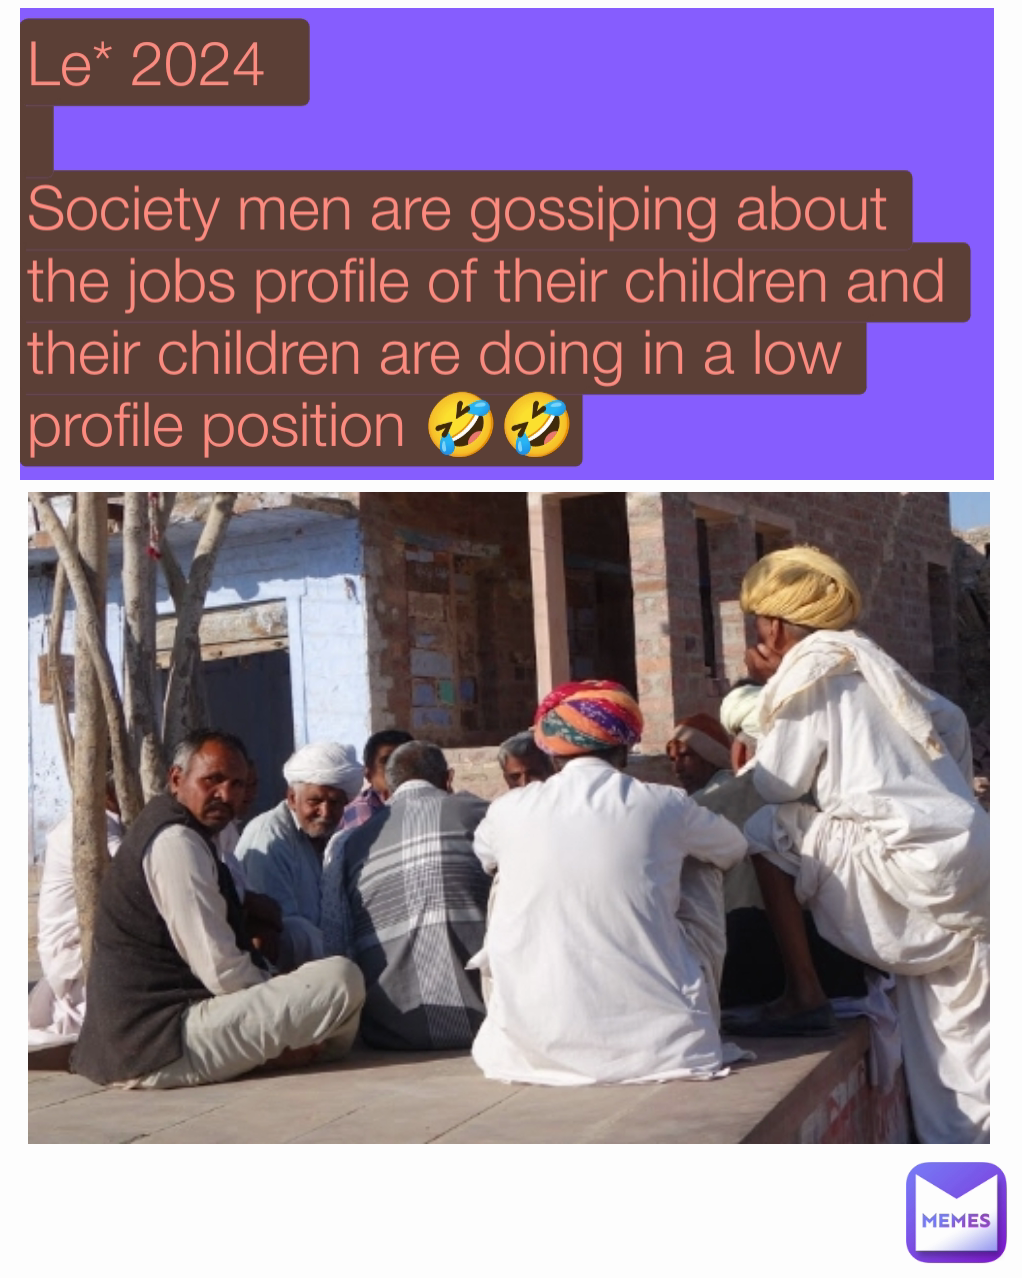 Le* 2024 

Society men are gossiping about the jobs profile of their children and their children are doing in a low profile position 🤣🤣